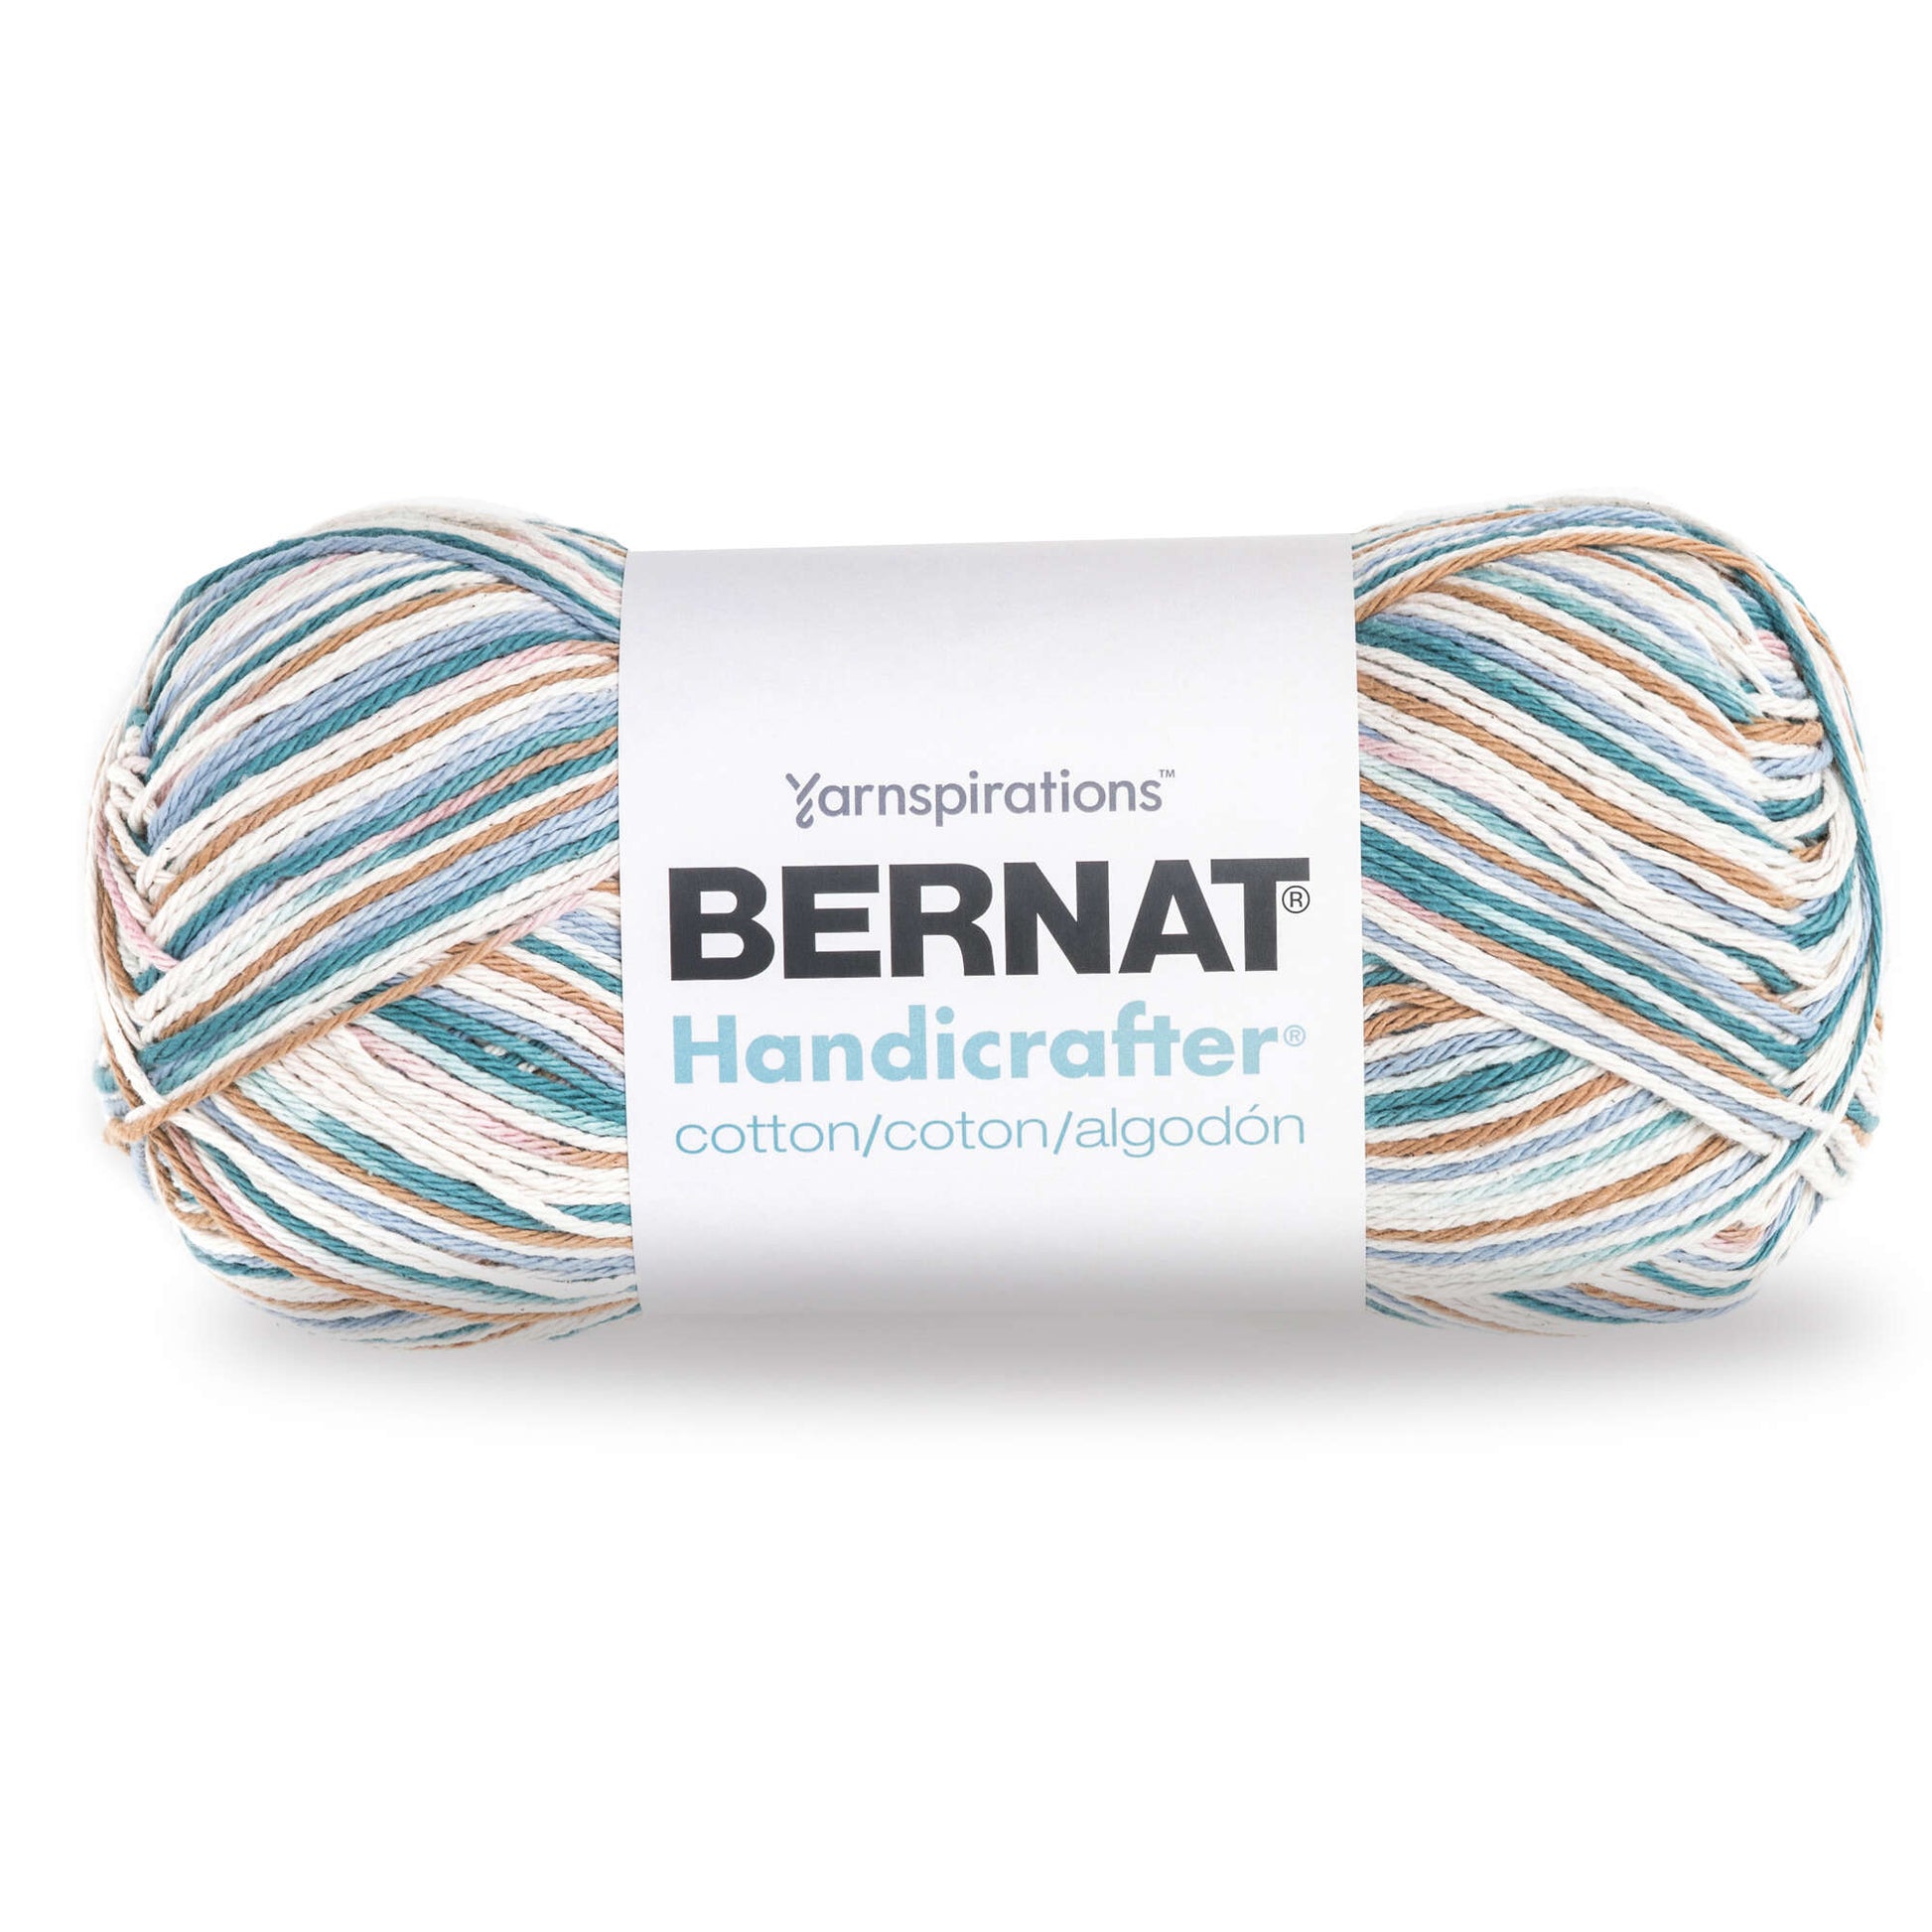 Bernat Handicrafter Cotton Ombres Yarn (340g/12oz) By the Sea